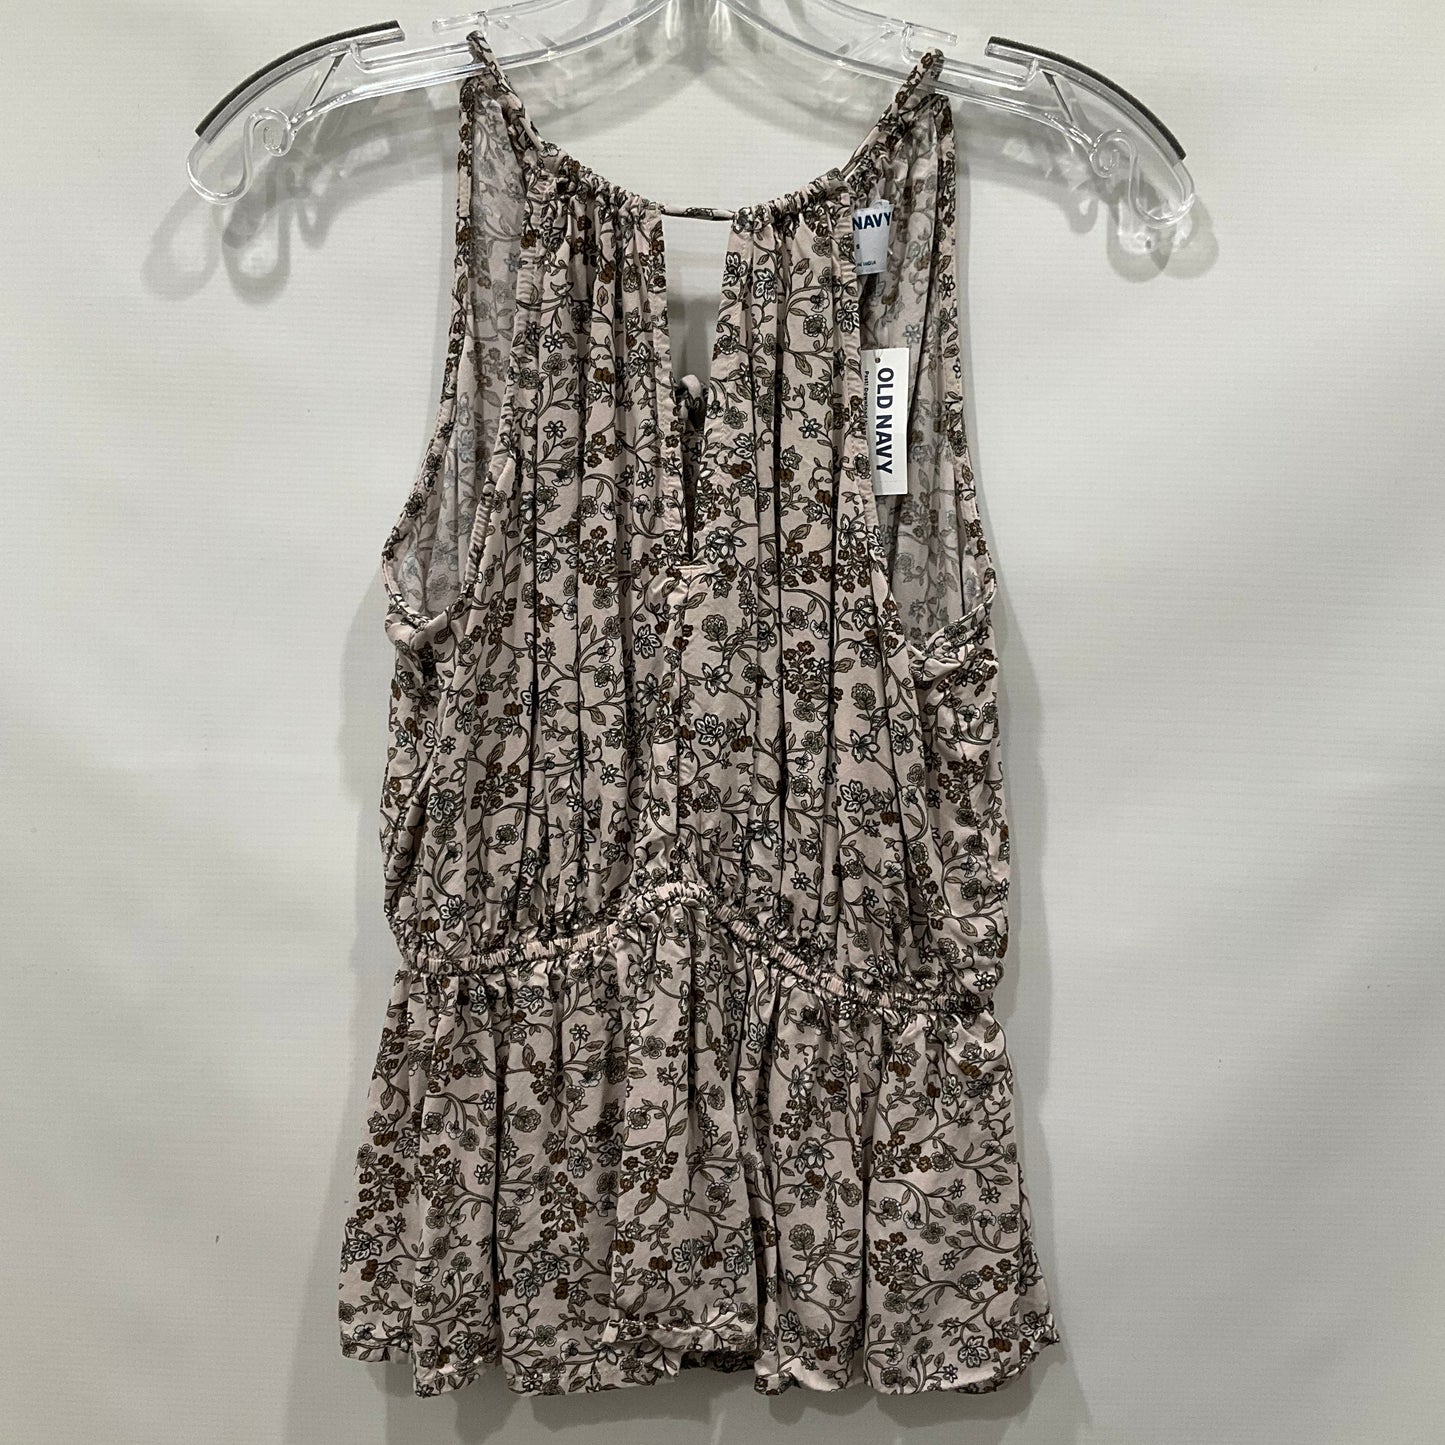 Flowered Top Sleeveless Old Navy, Size S